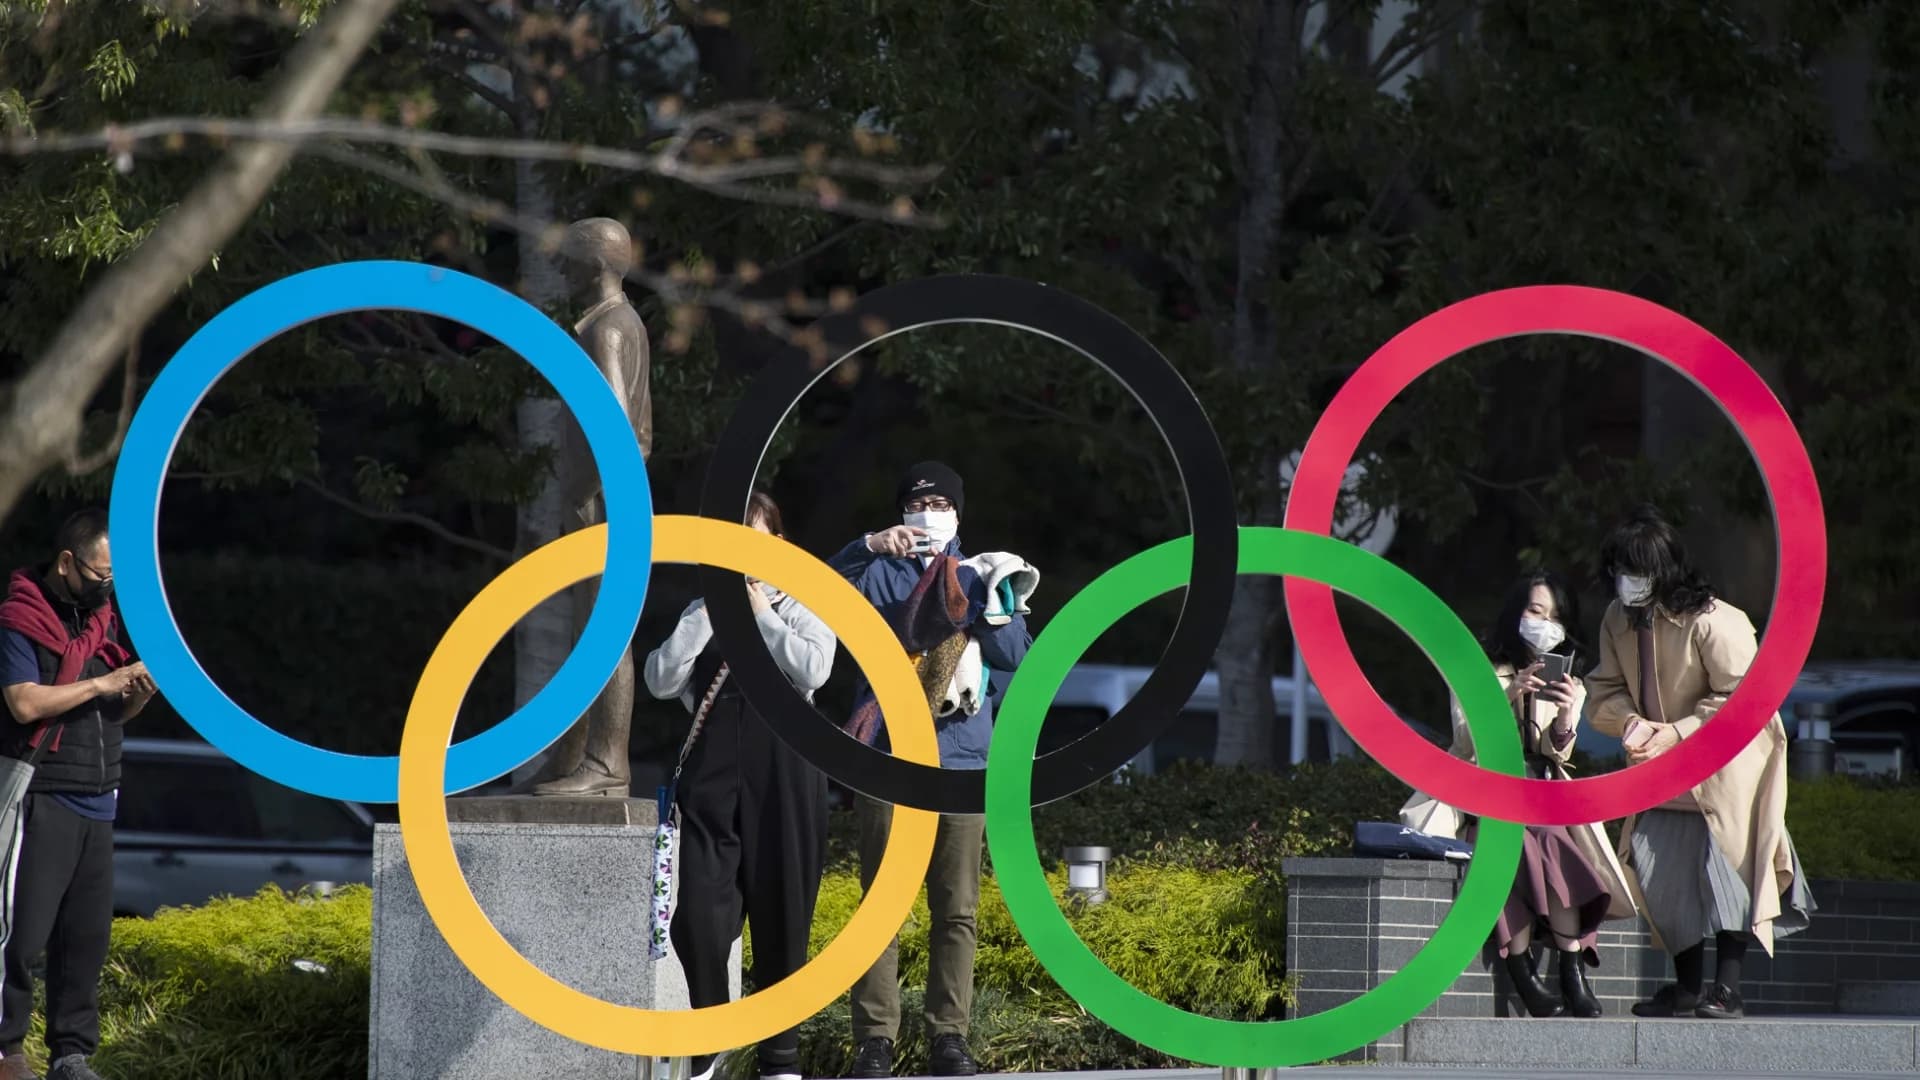 Spectators from abroad to be barred from Tokyo Olympics